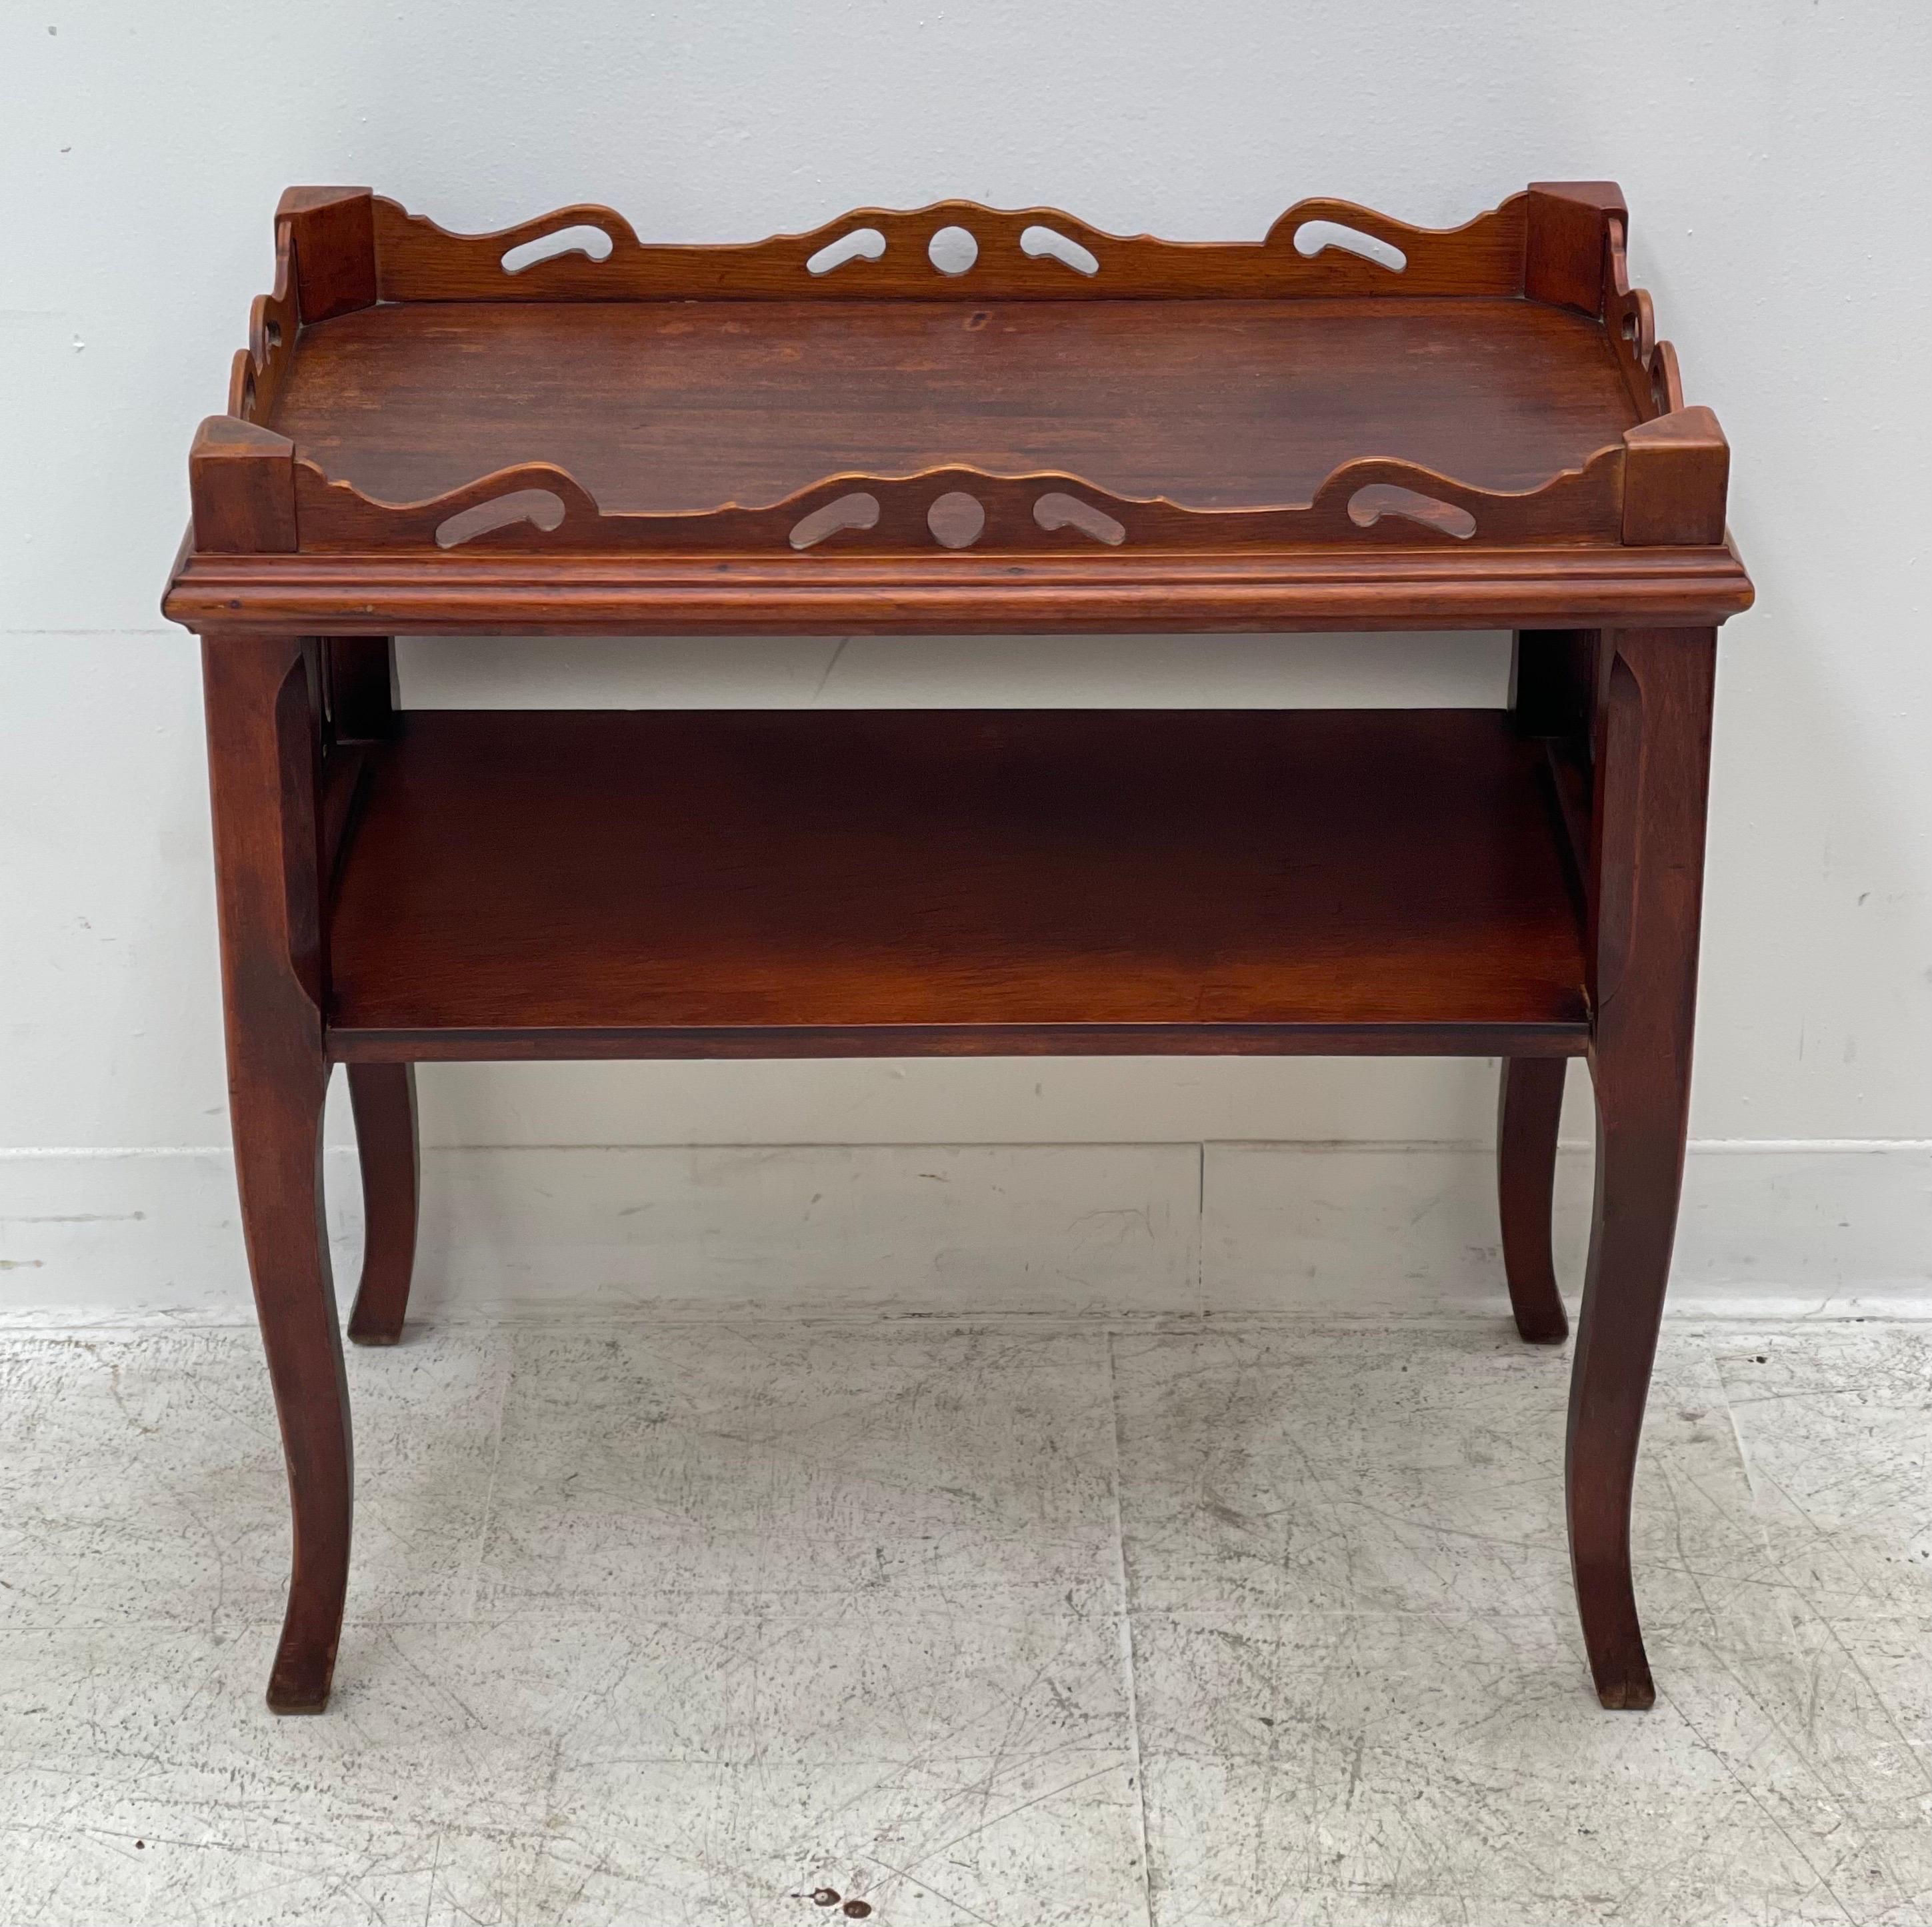 Antique hand carved coffee table.

Dimensions. 25 W ; 15 D ; 24 H.